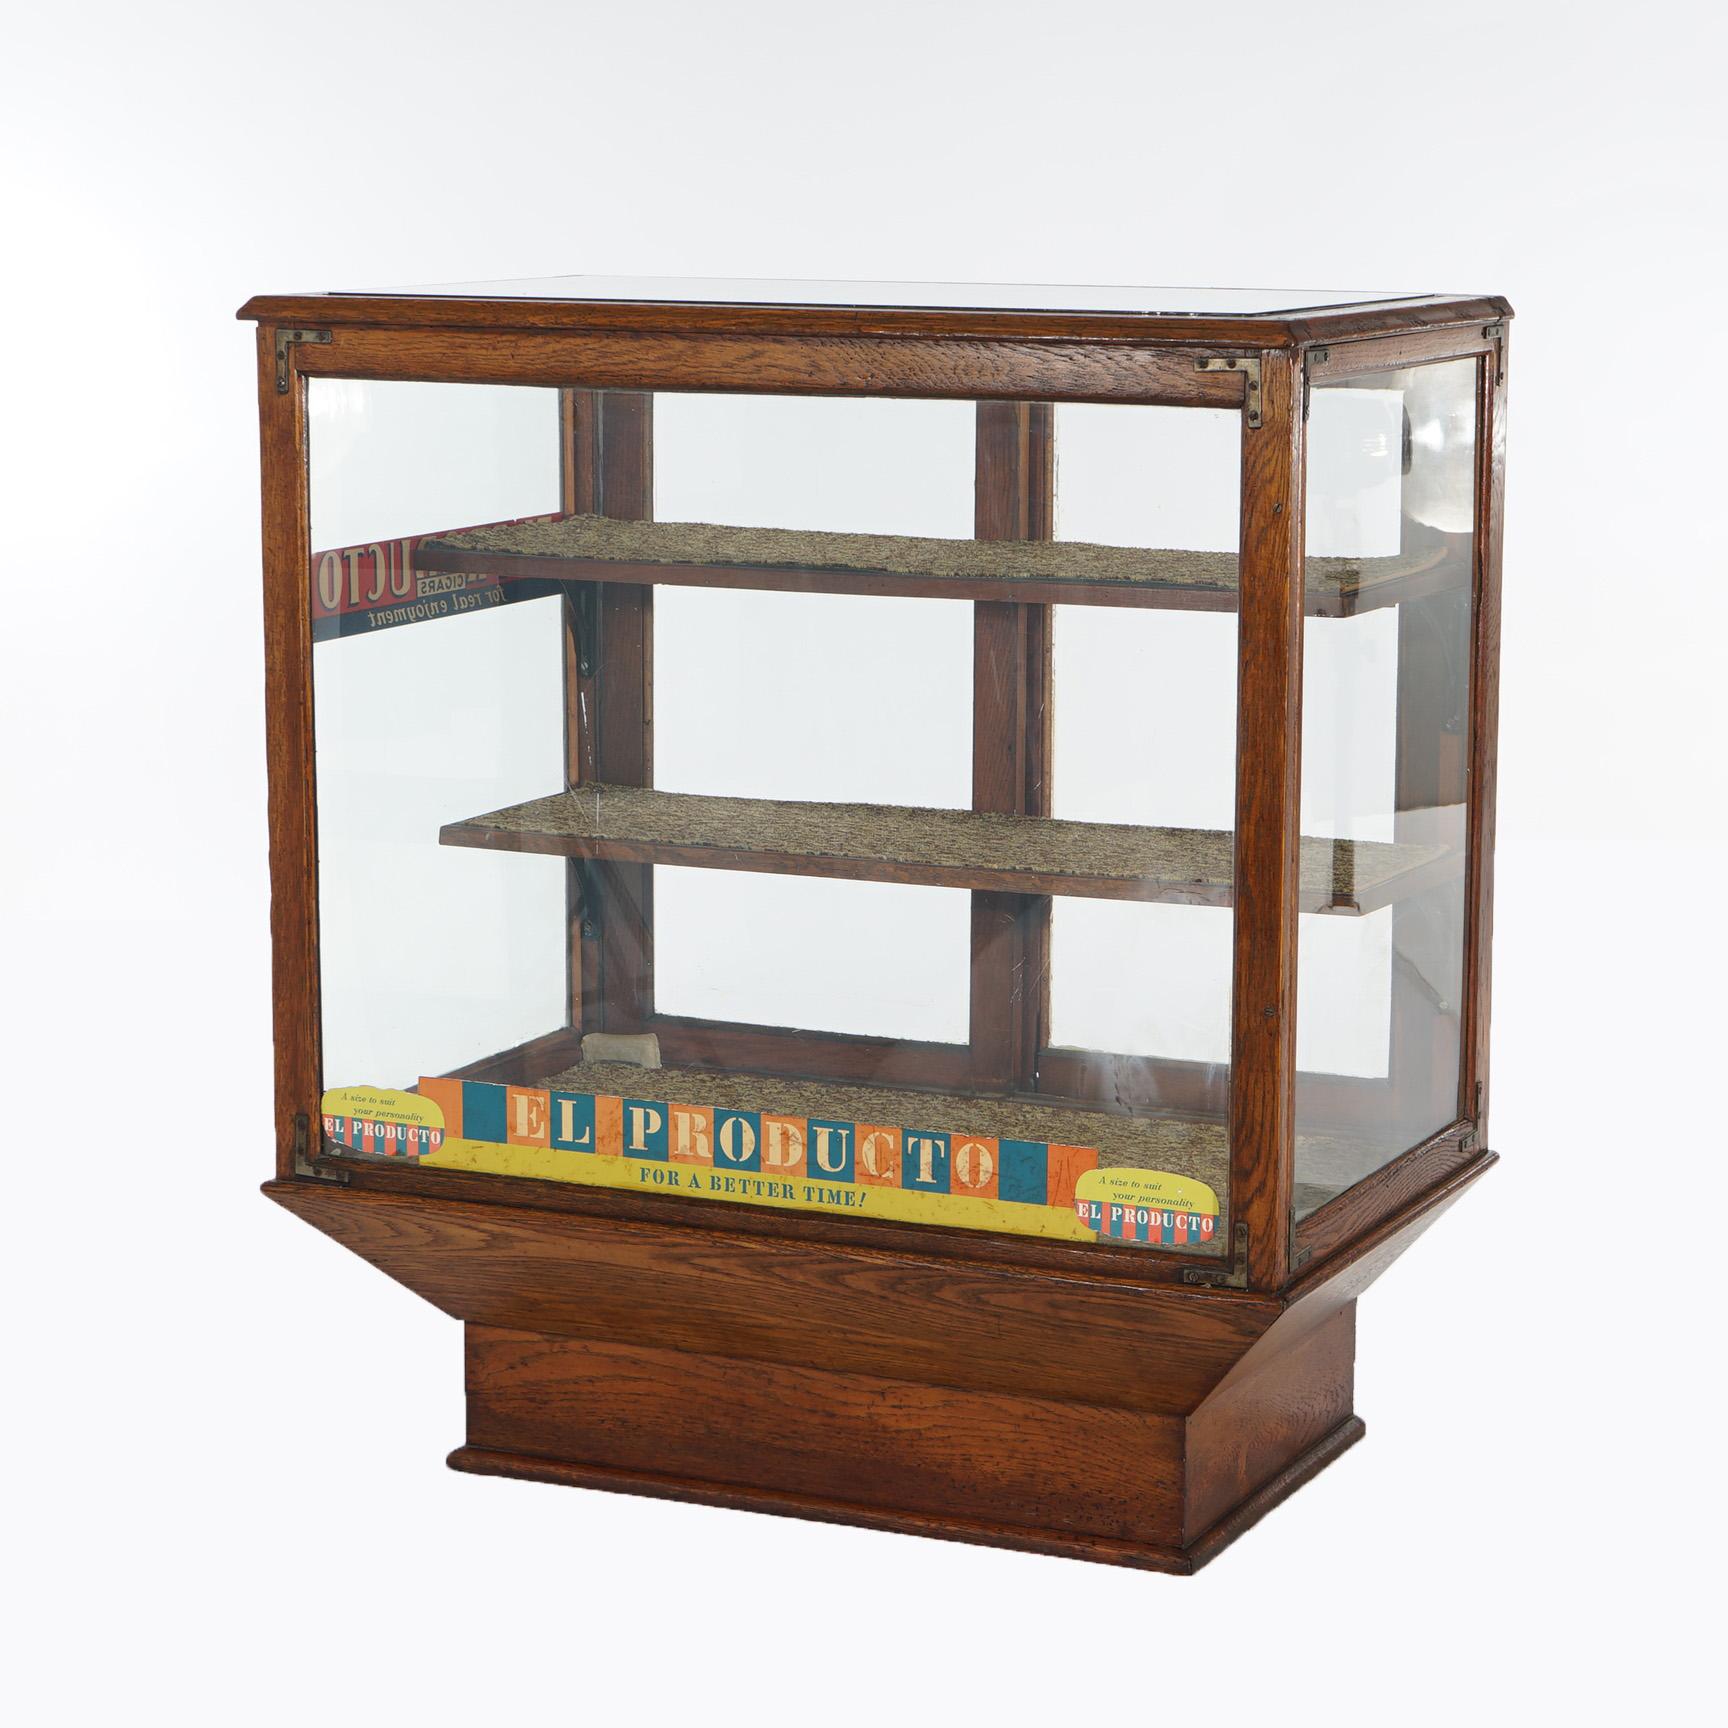 20th Century Antique Oak & Glass El Producto Country Store Cigar Display Case C1910